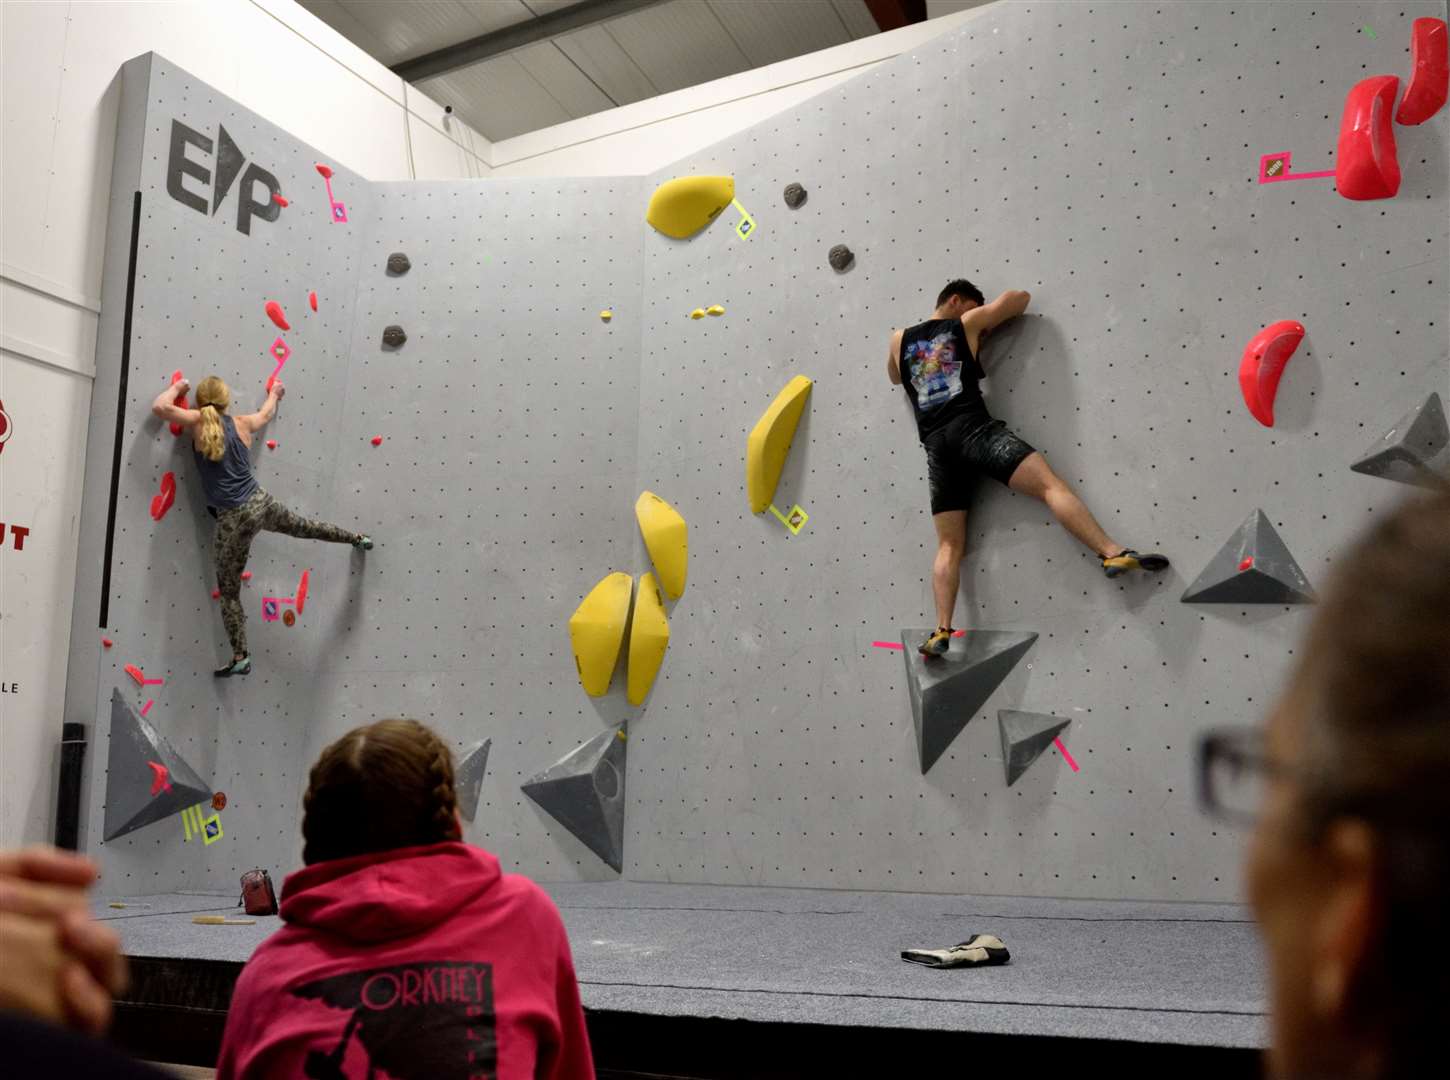 Louis Langlands and Sally Reeves on the bouldering wall. Picture: Ben Clarke